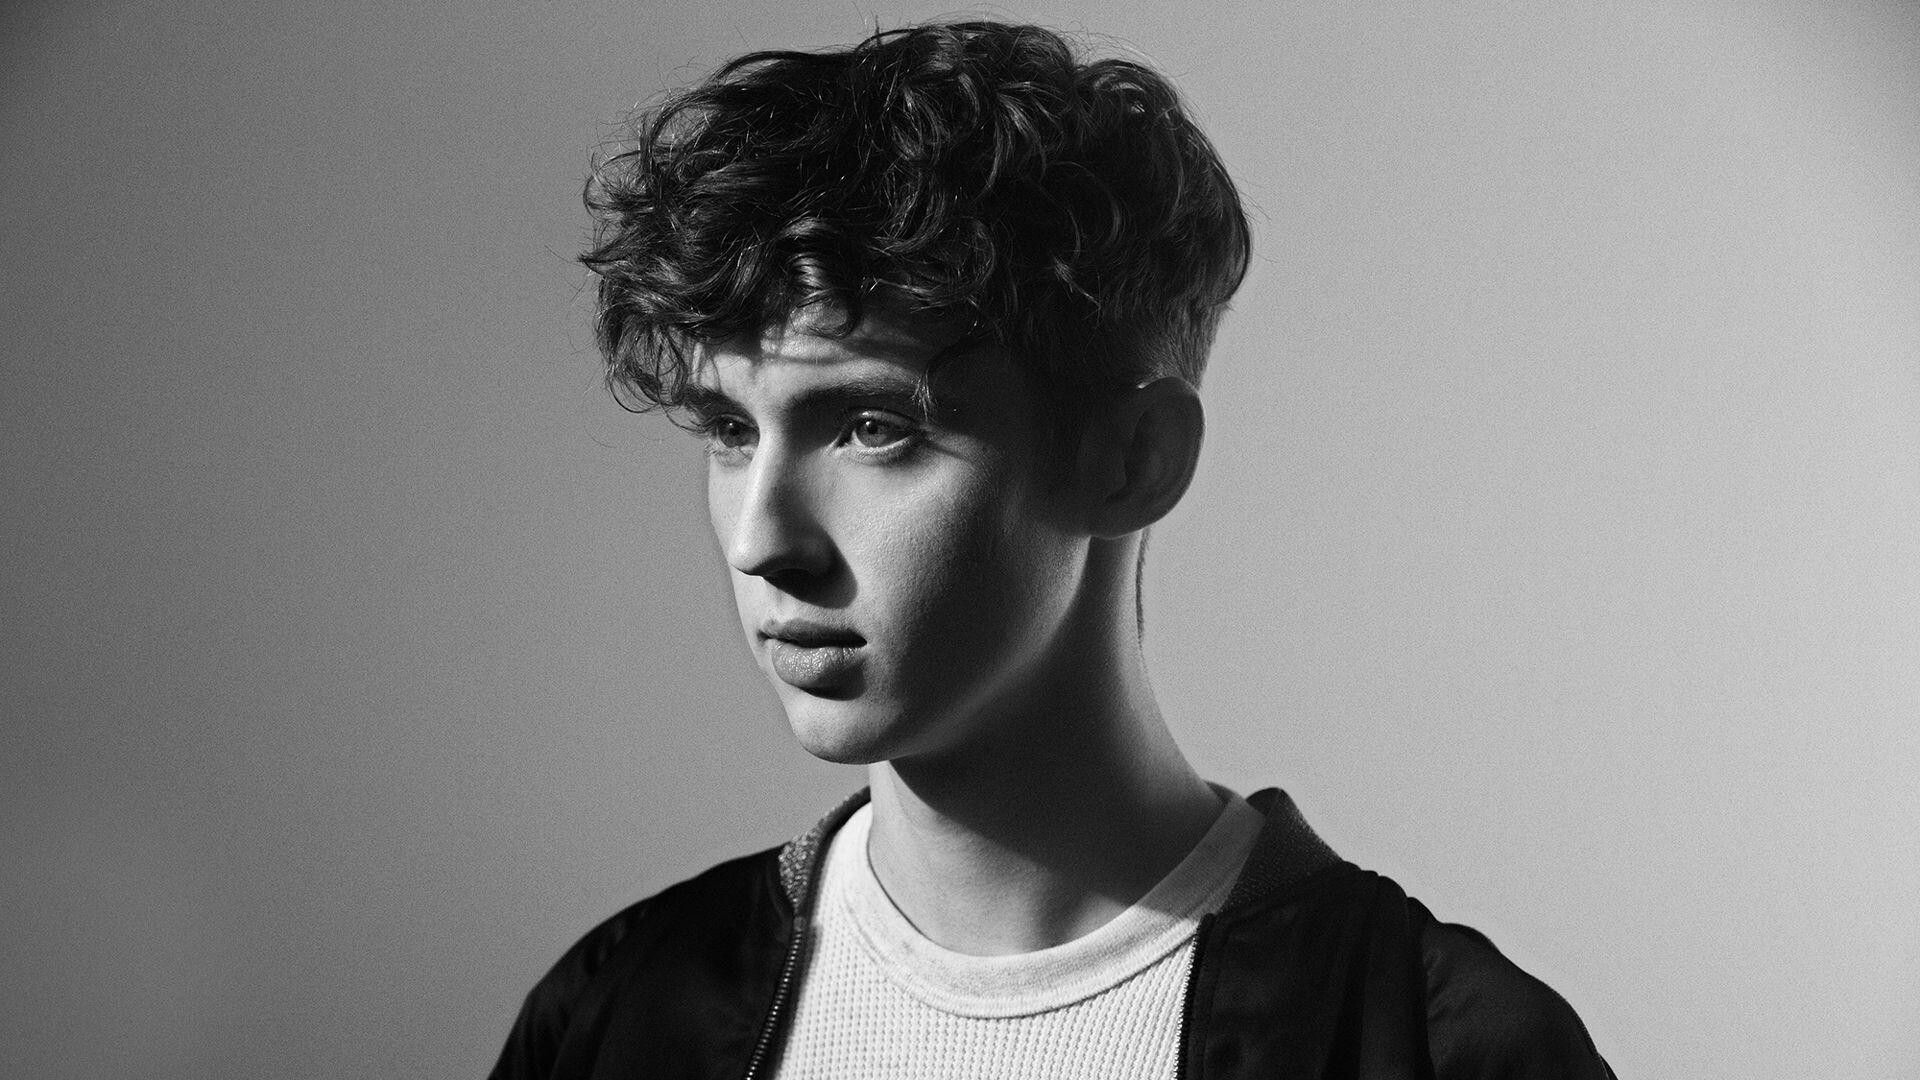 Troye Sivan: TRXYE, the third extended play, was released on 15 August 2014. 1920x1080 Full HD Background.